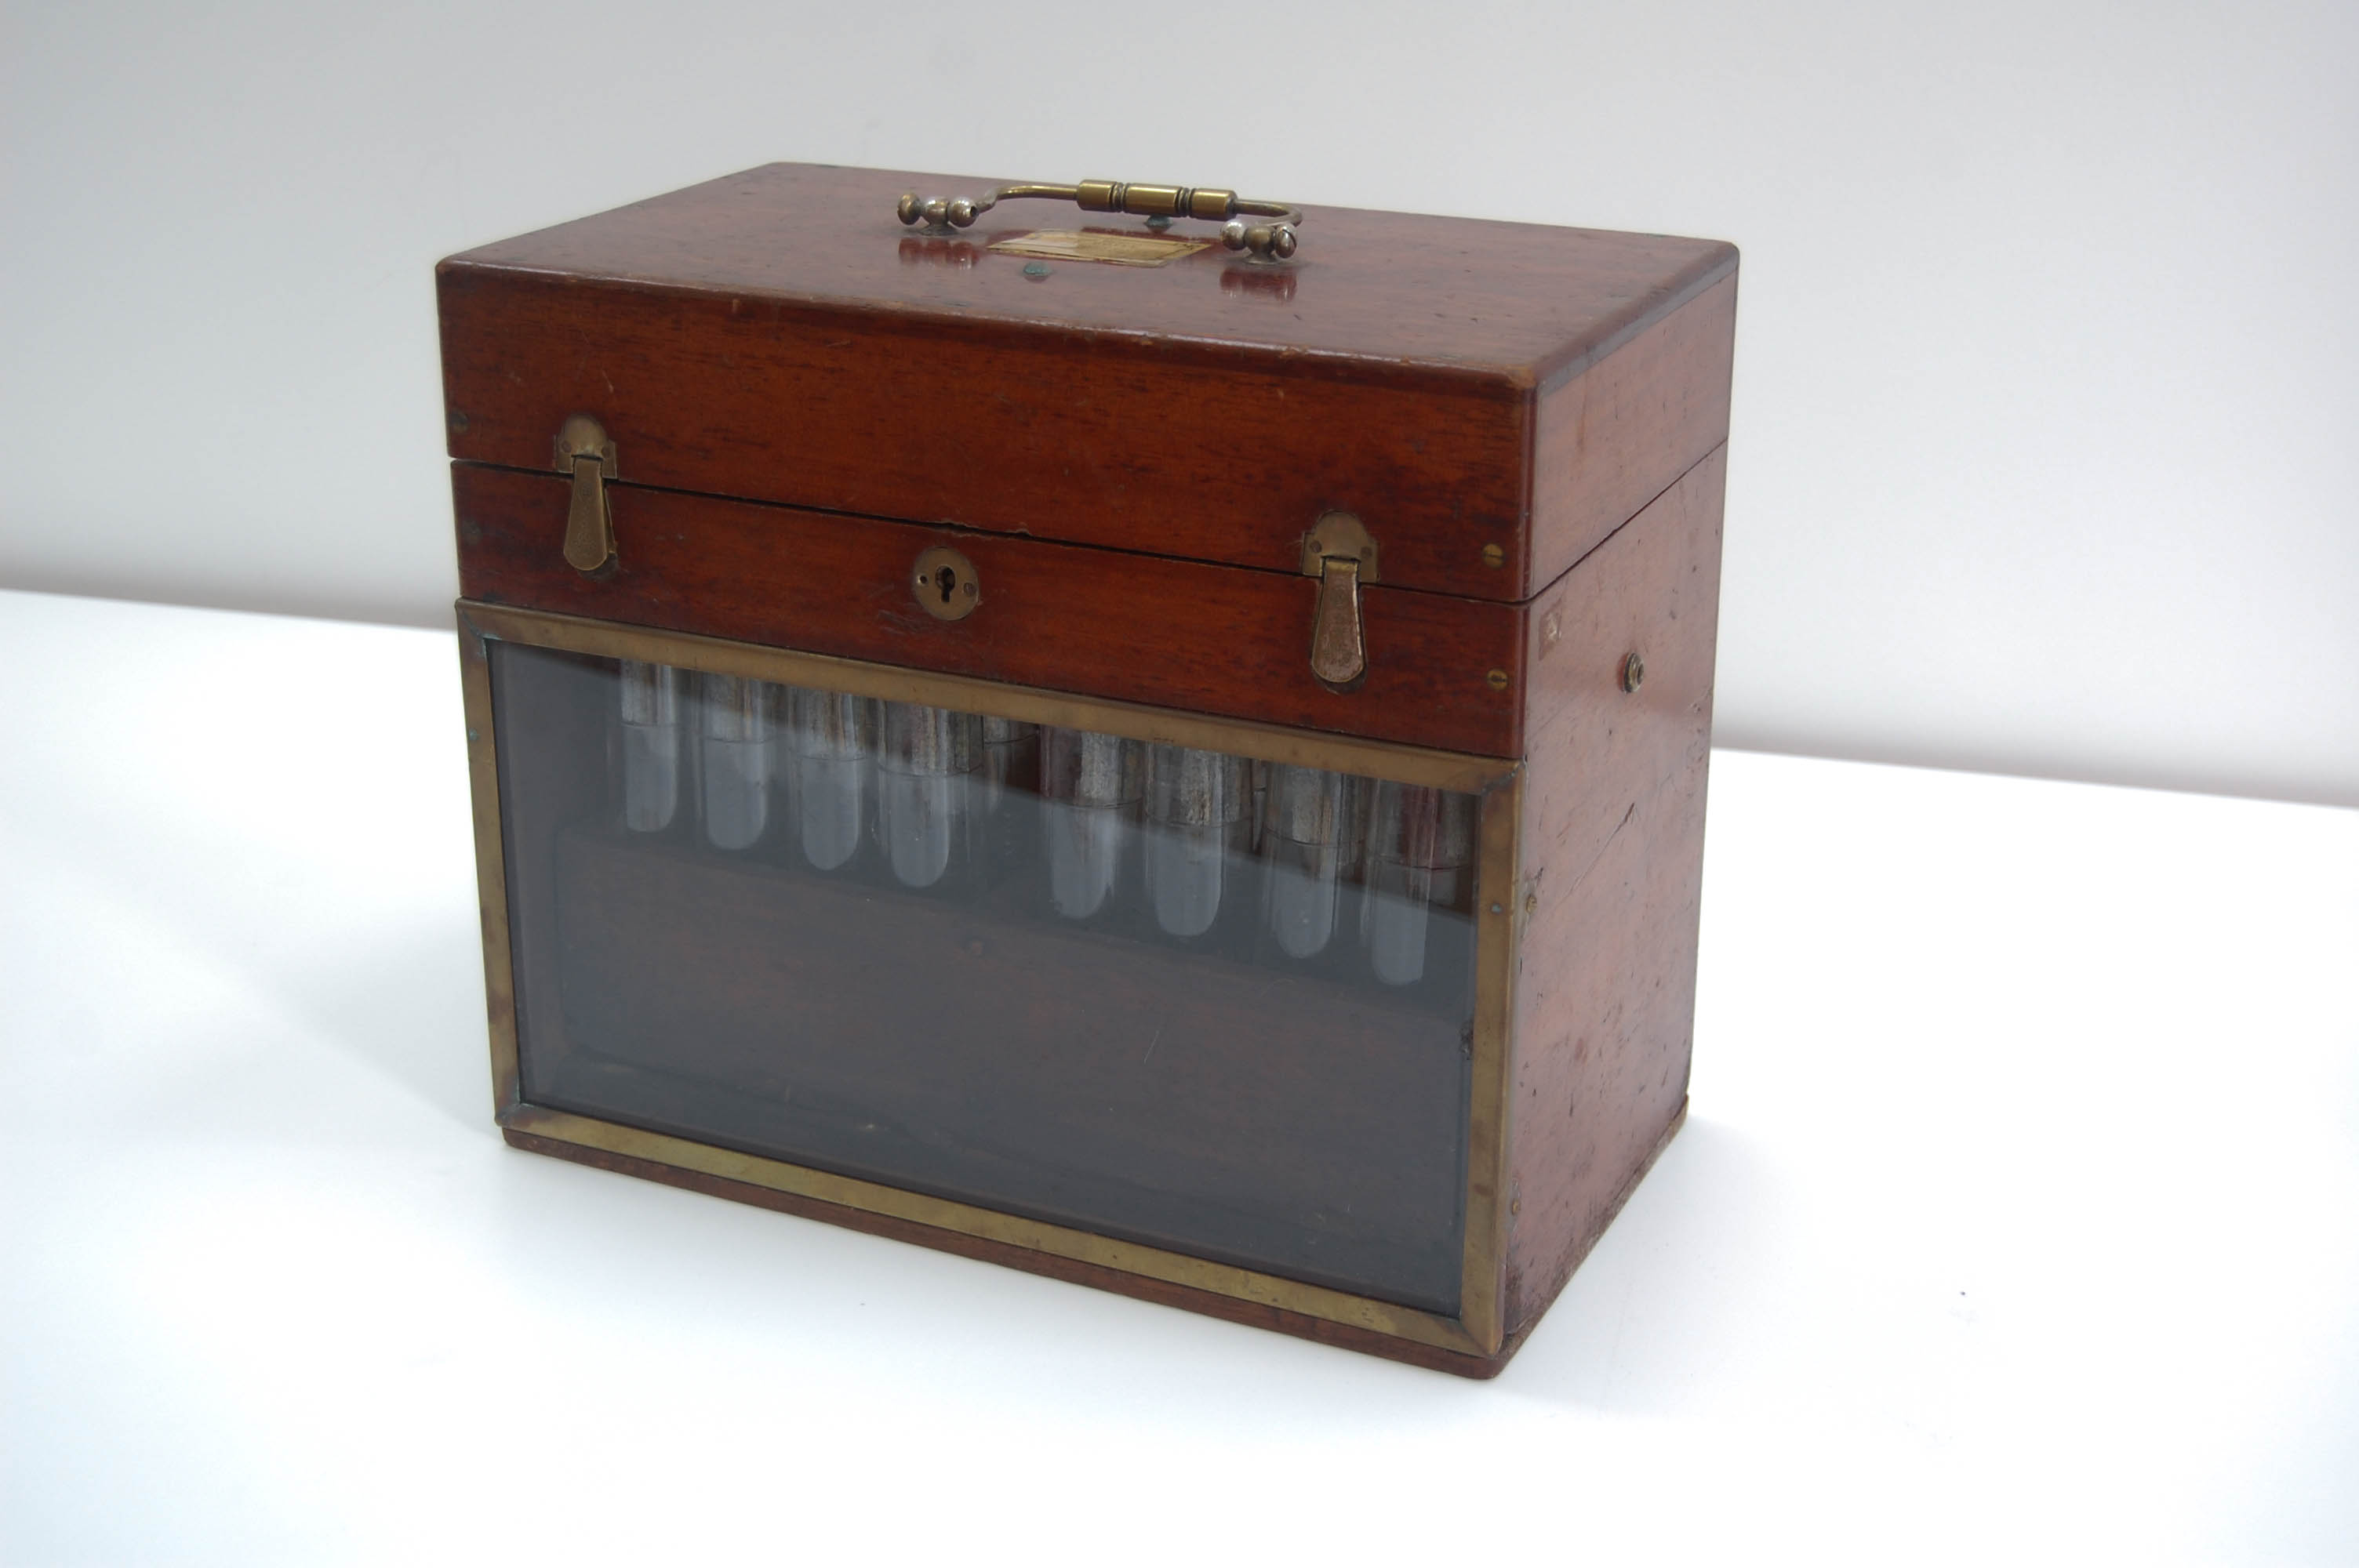 French Wet Cell Electrotherapy Machine by Charles Chardin of Paris